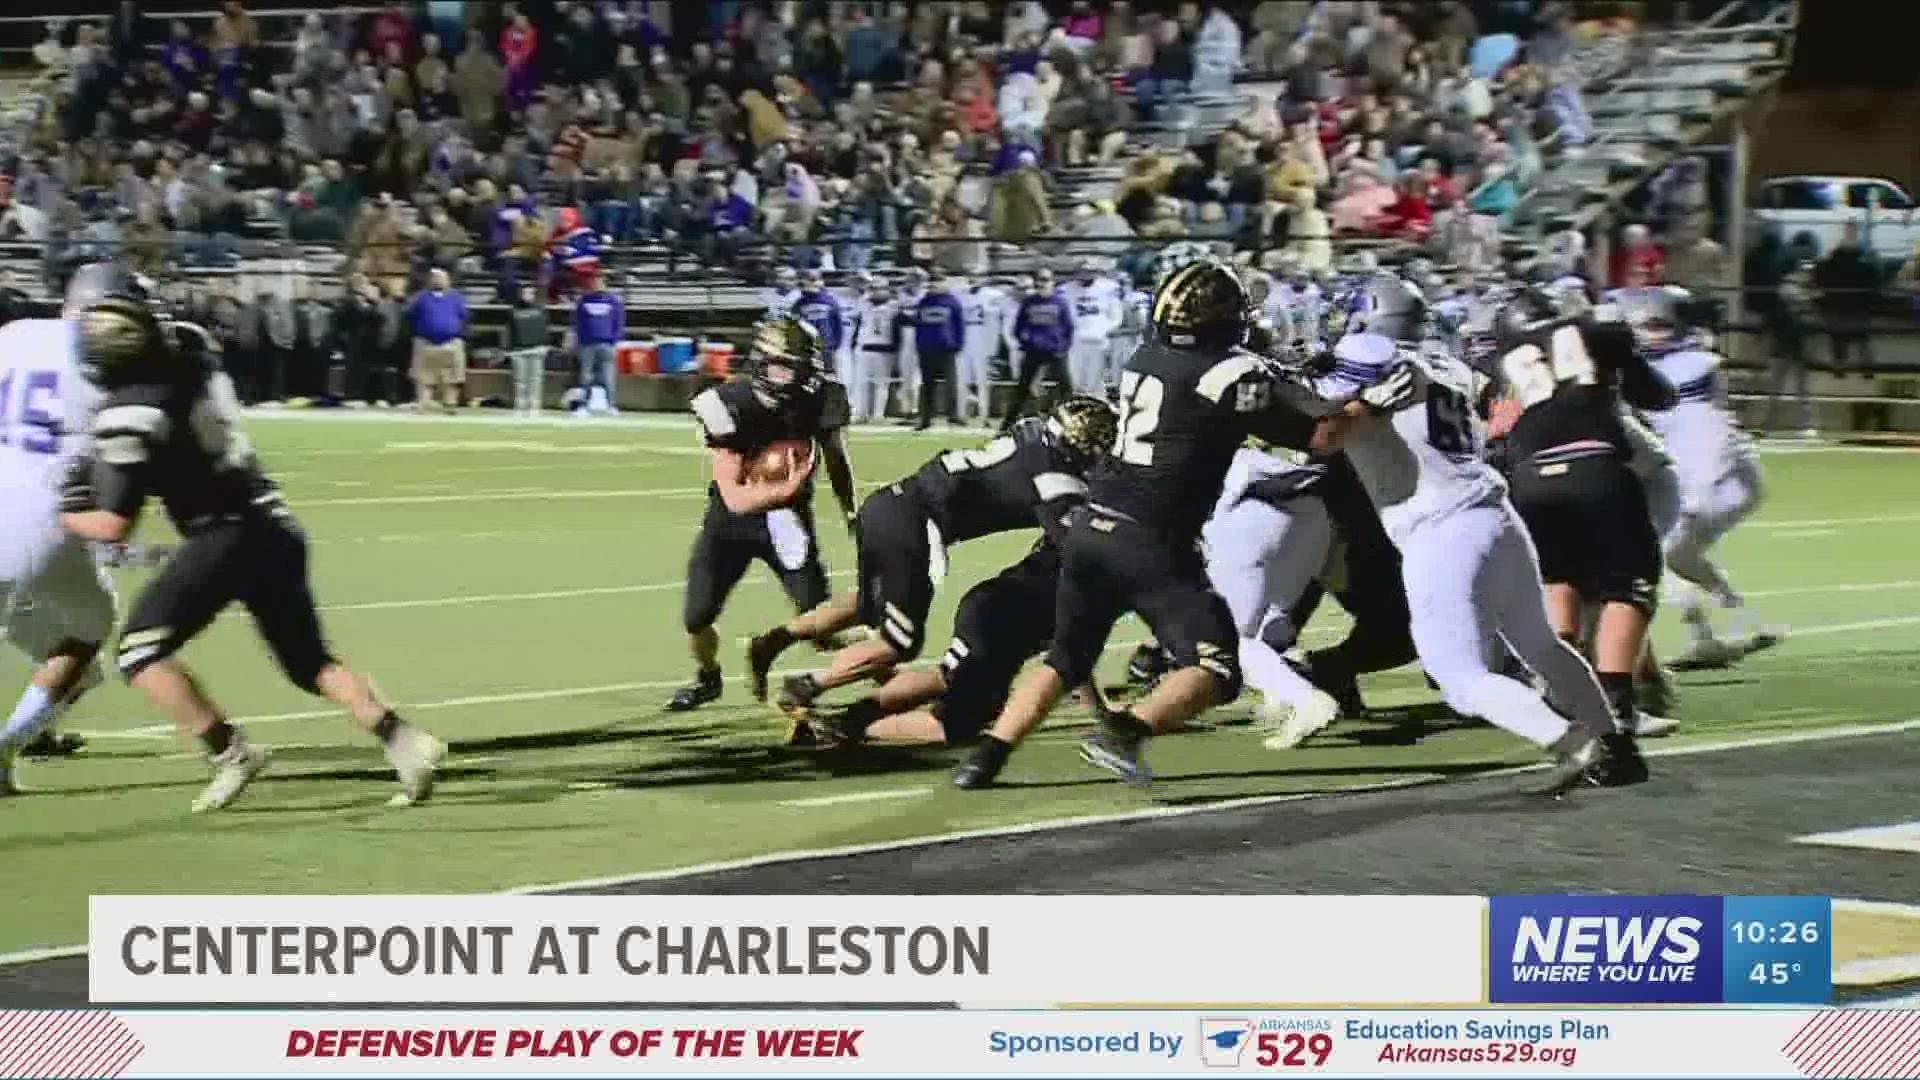 Charleston's great season comes to an early end with a loss to Centerpoint in the playoffs.